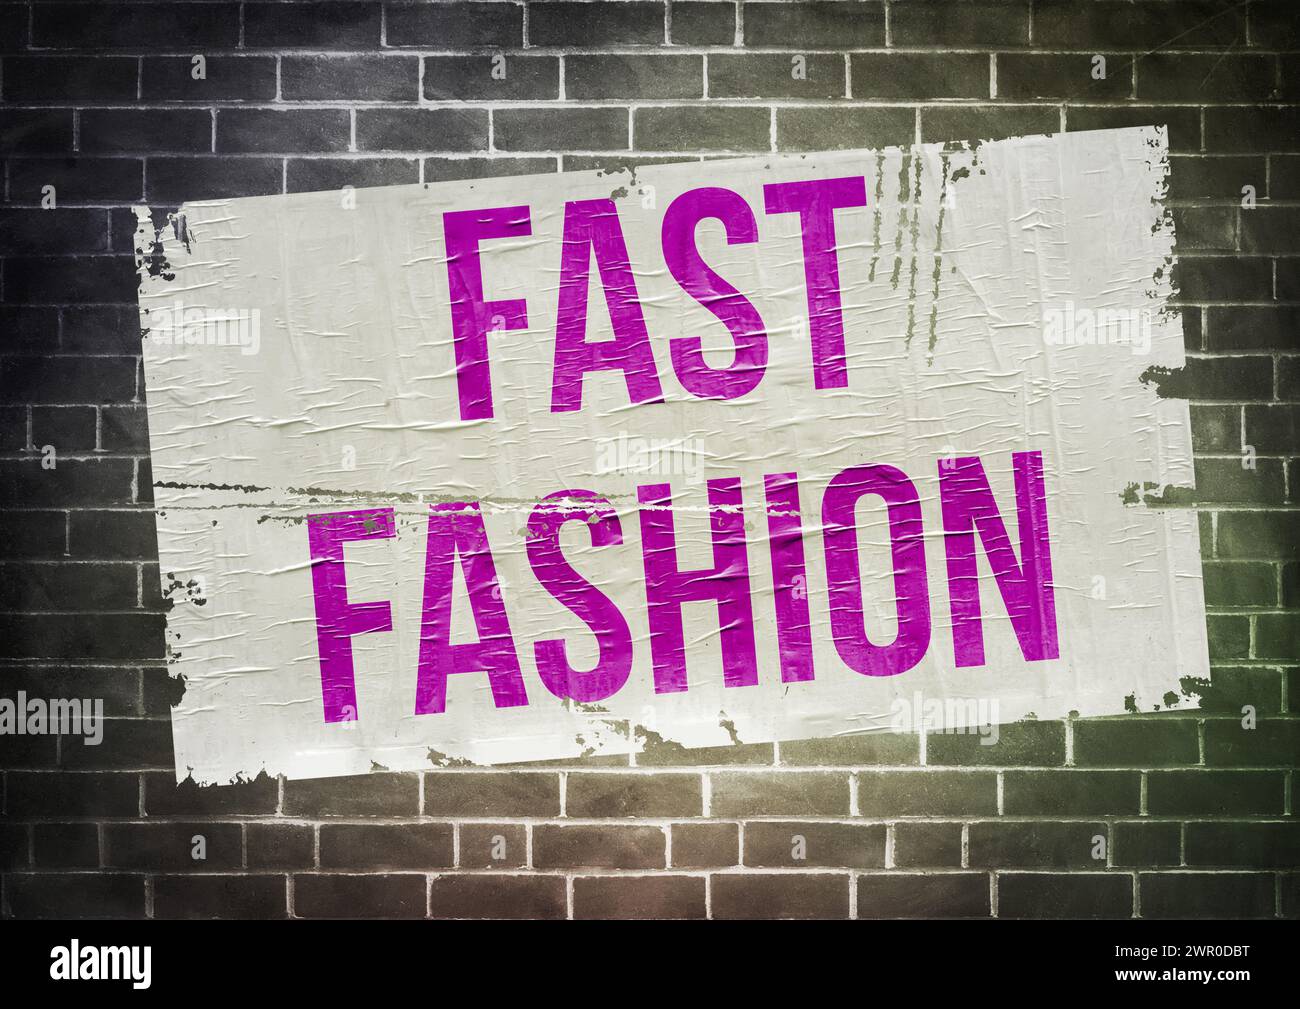 Fast Fashion - poster message Stock Photo